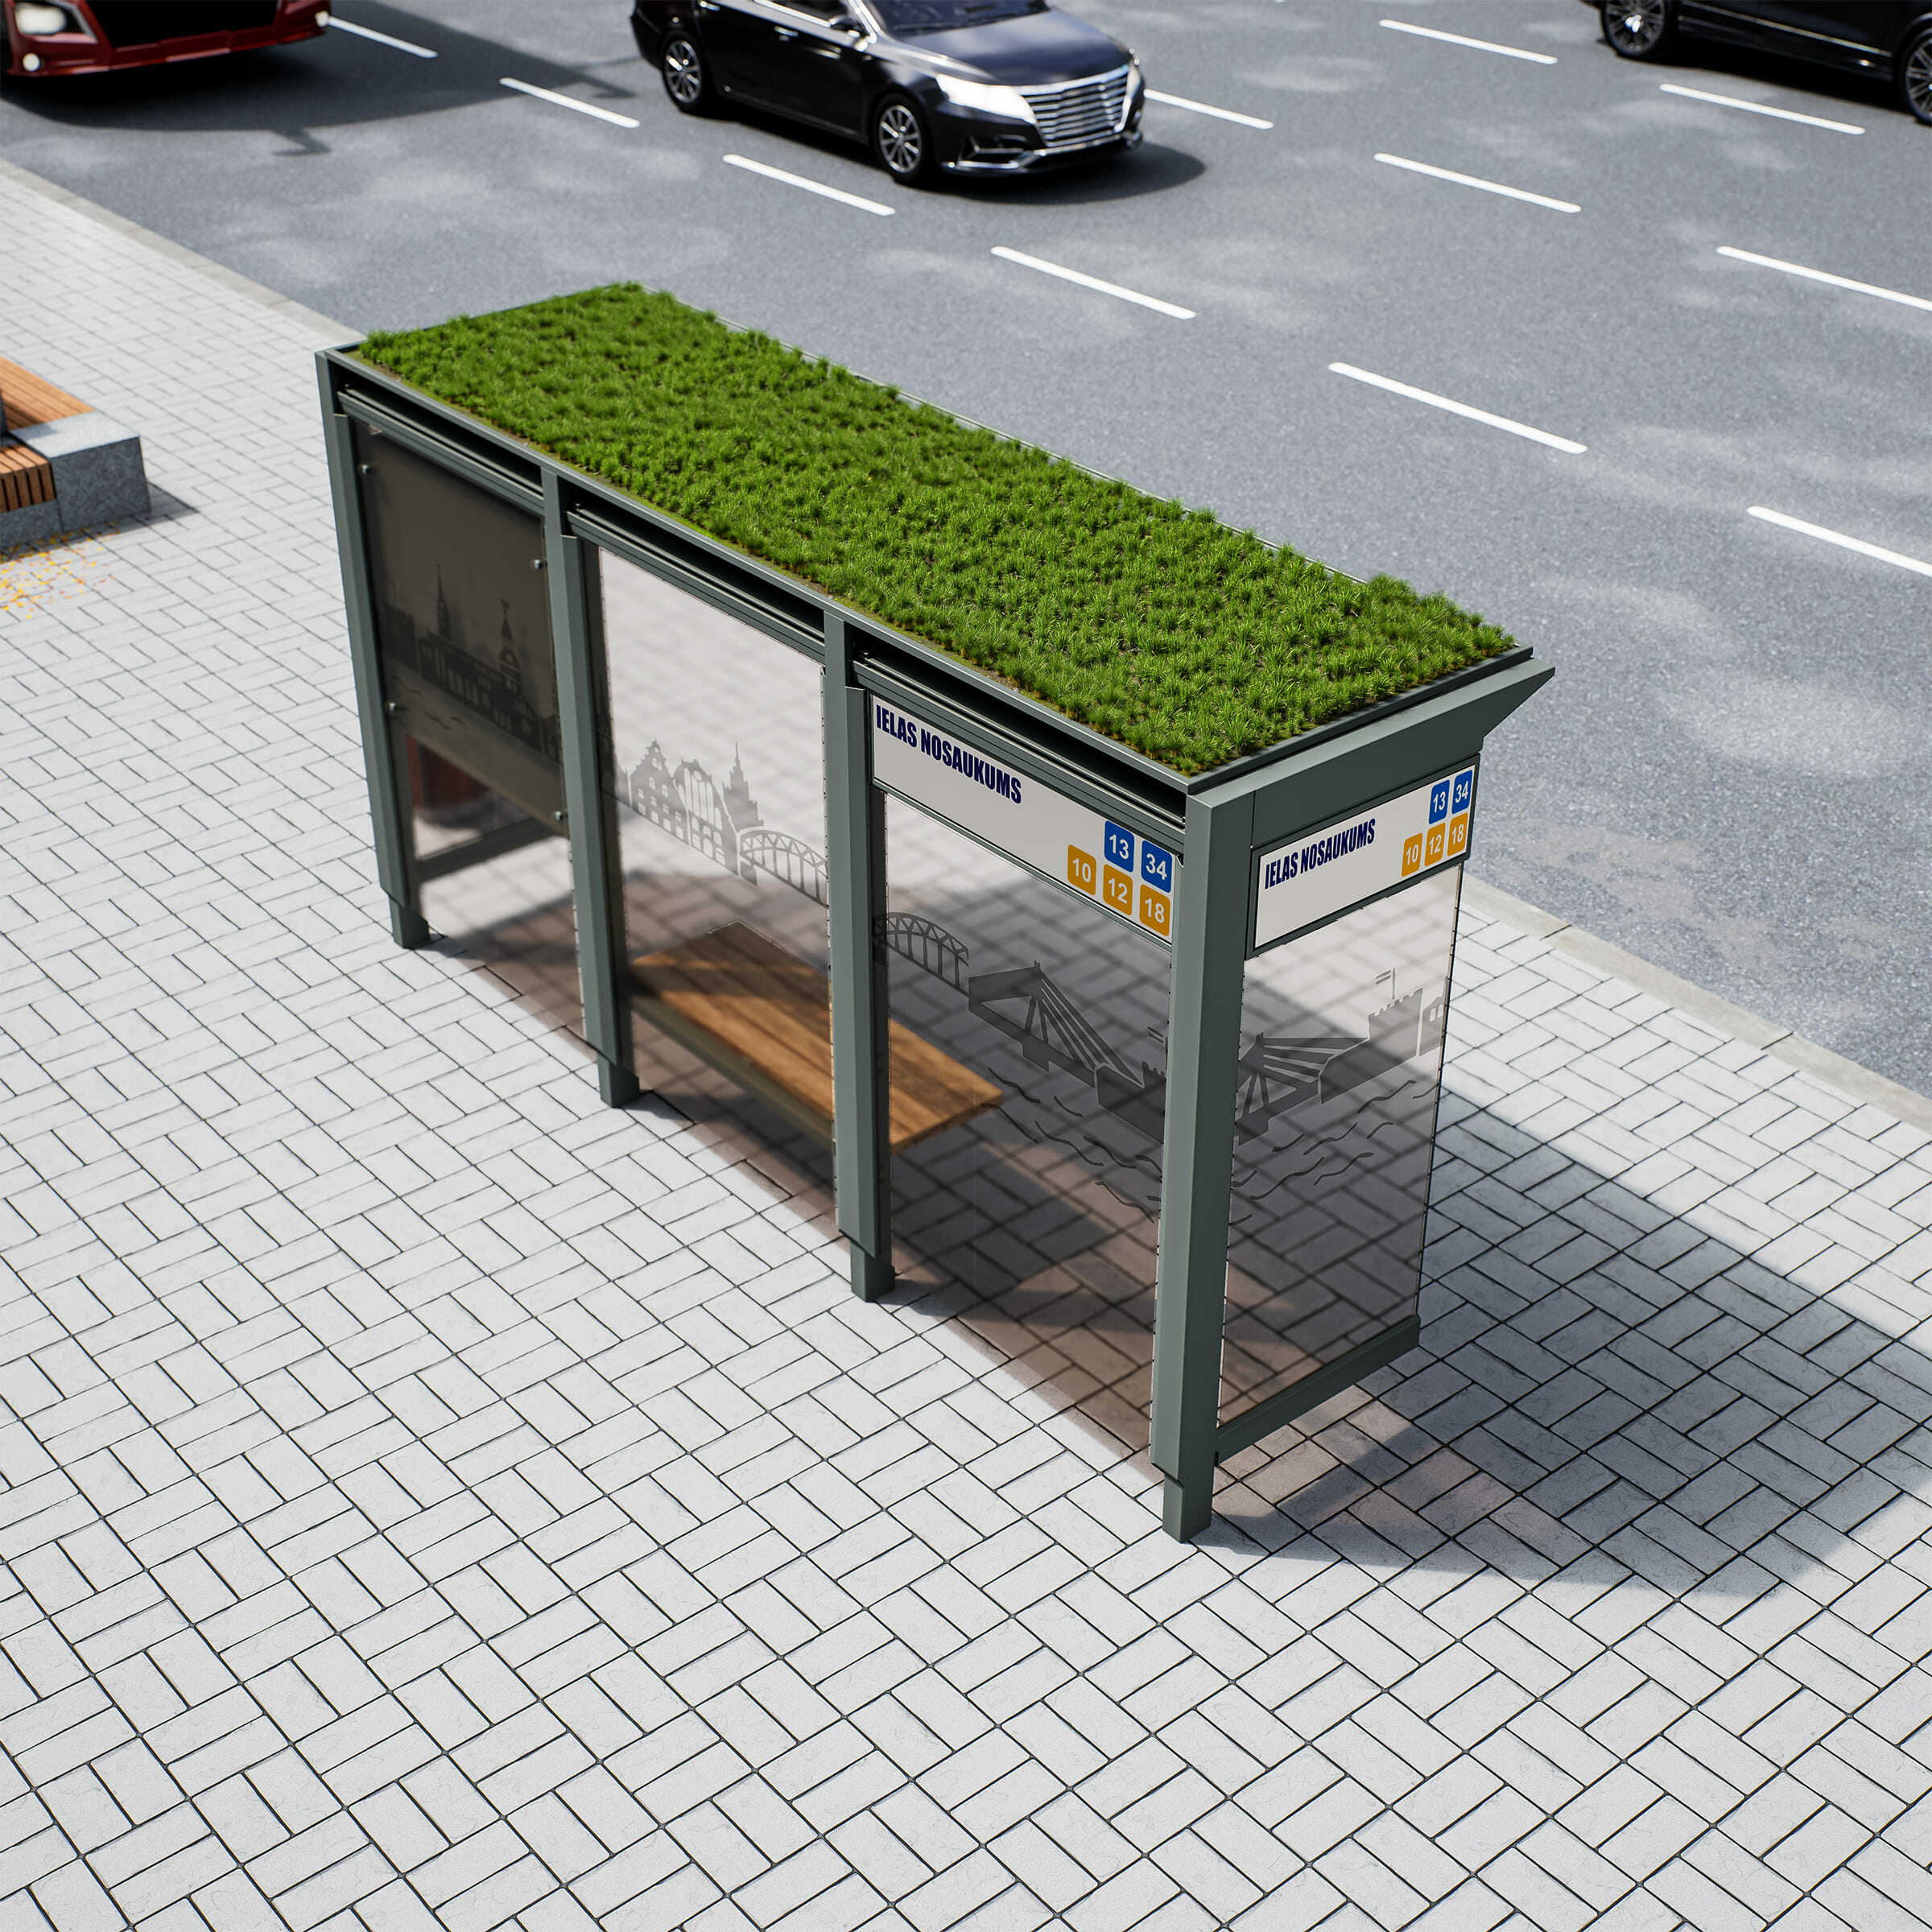 Bus Shelter RIGA (S/M) Green Panels Rooftop Set by PALAMI Group - Compact Outdoor Advertising Display